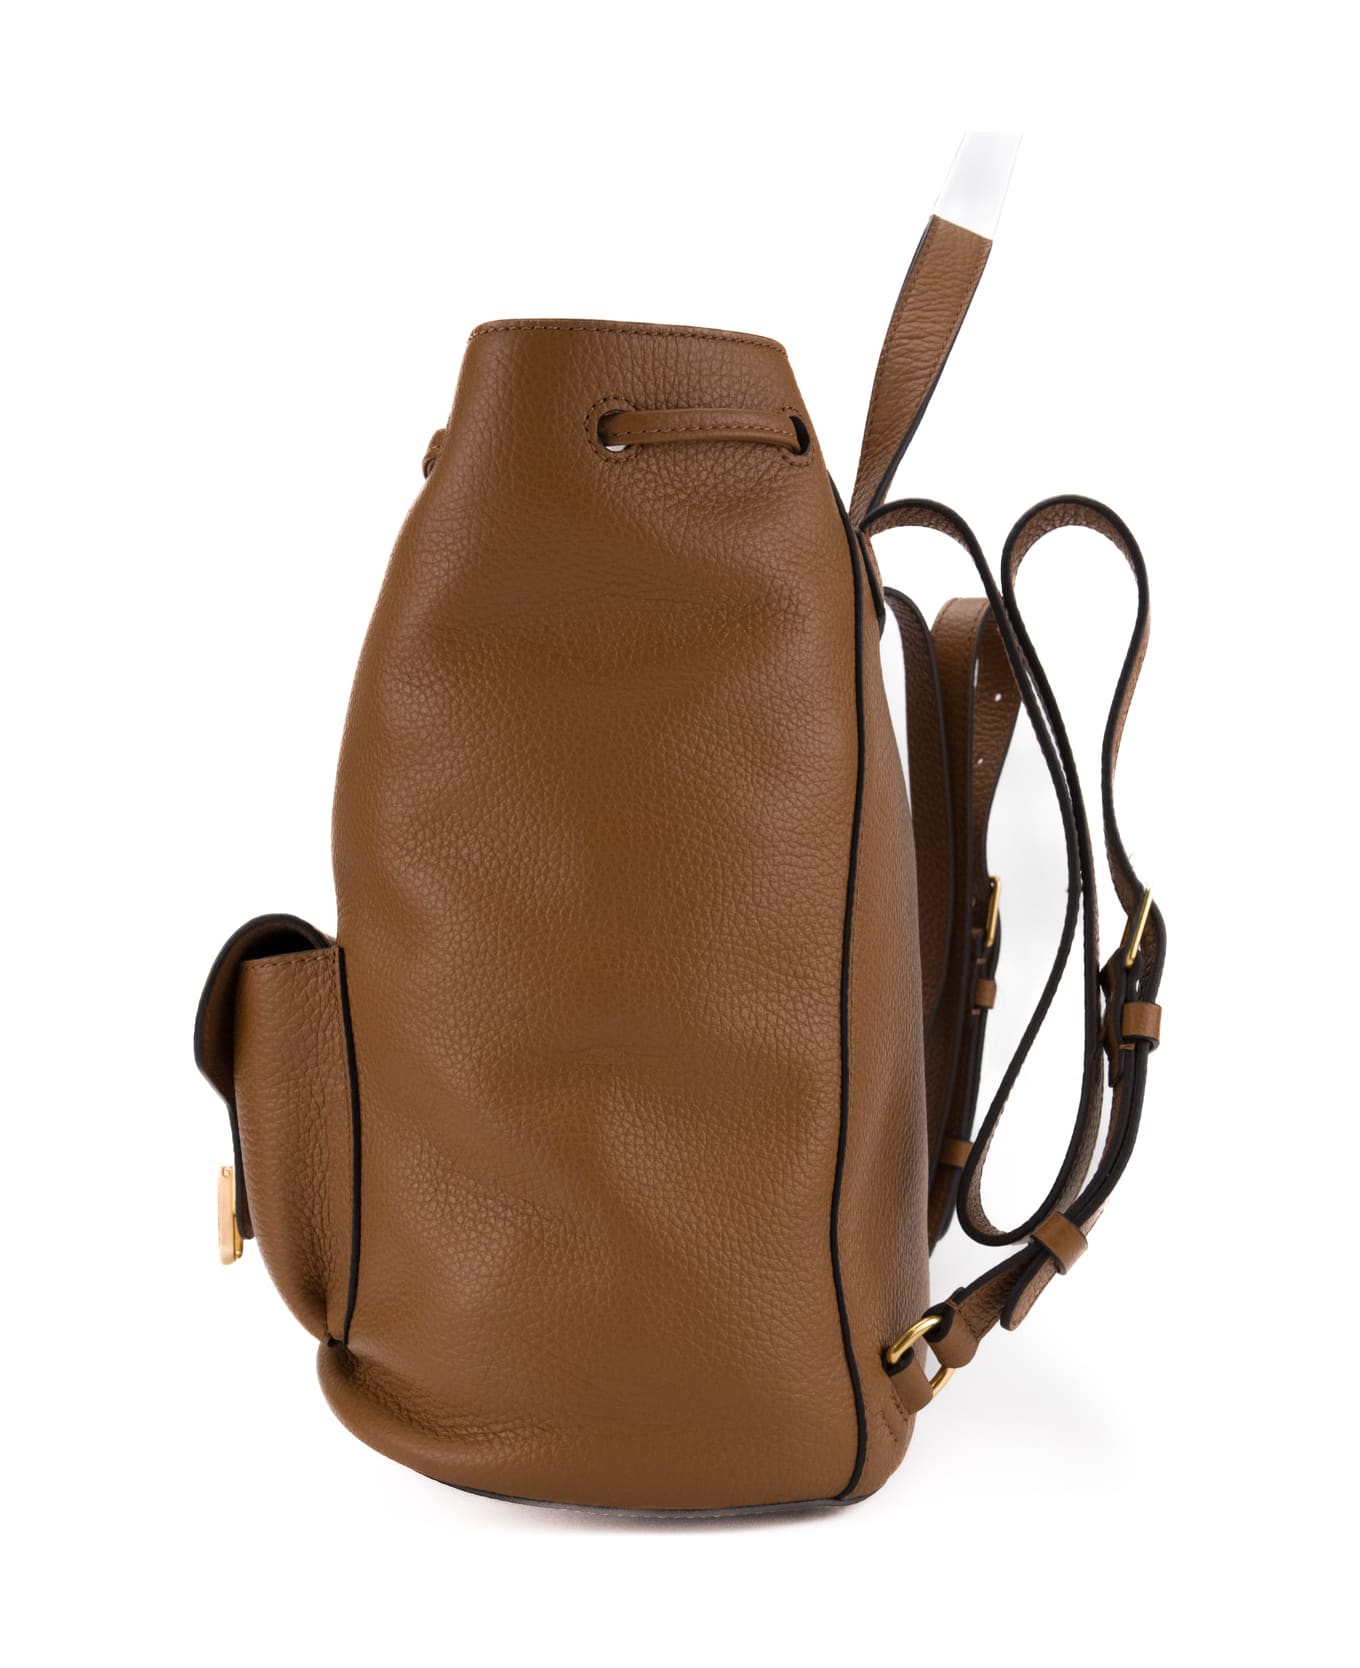 Coccinelle Beat Soft Brown Backpack - Cuir